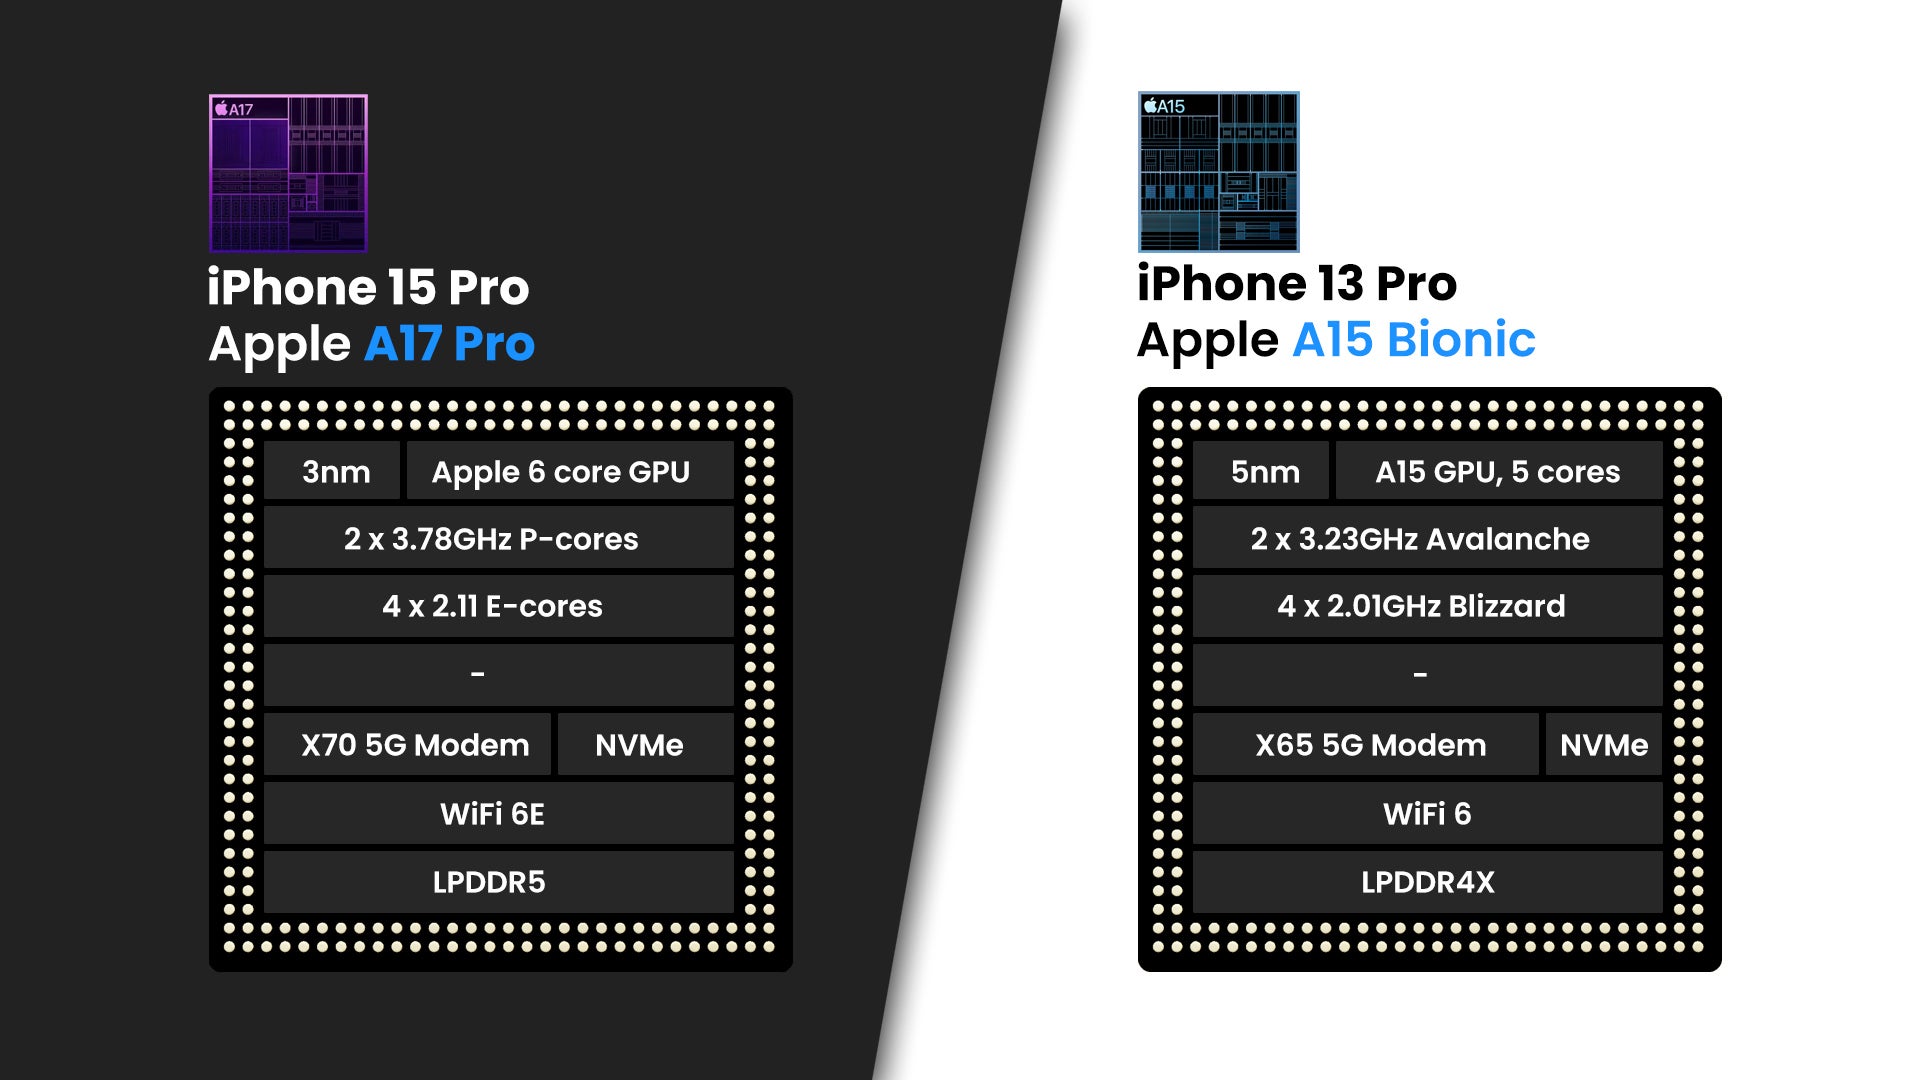 iPhone 15 Pro vs iPhone 13 Pro: what has changed?